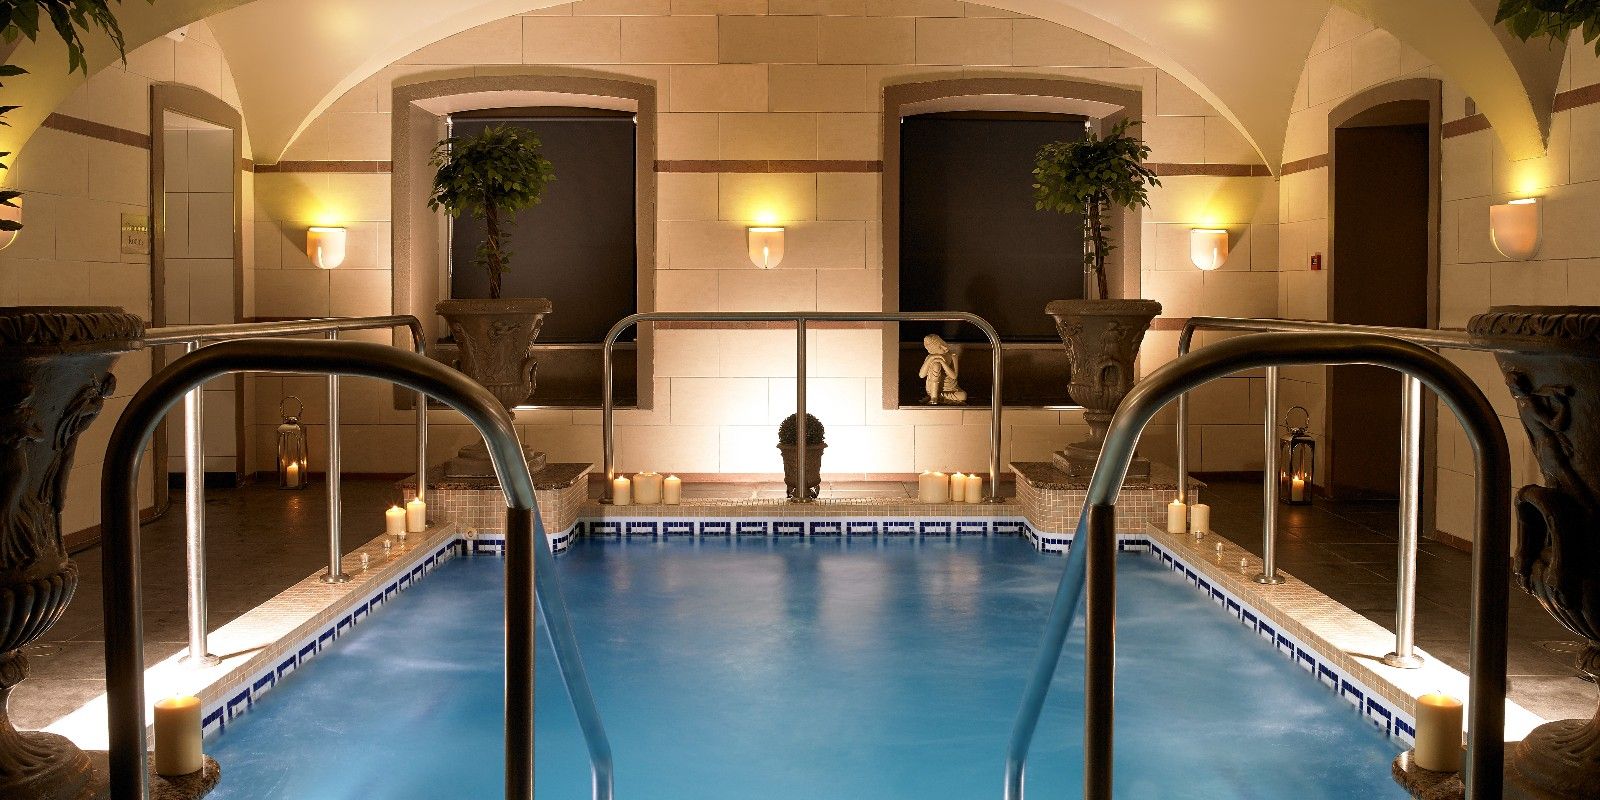 3 Thermal Suite Faithlegg House Hotel Waterford